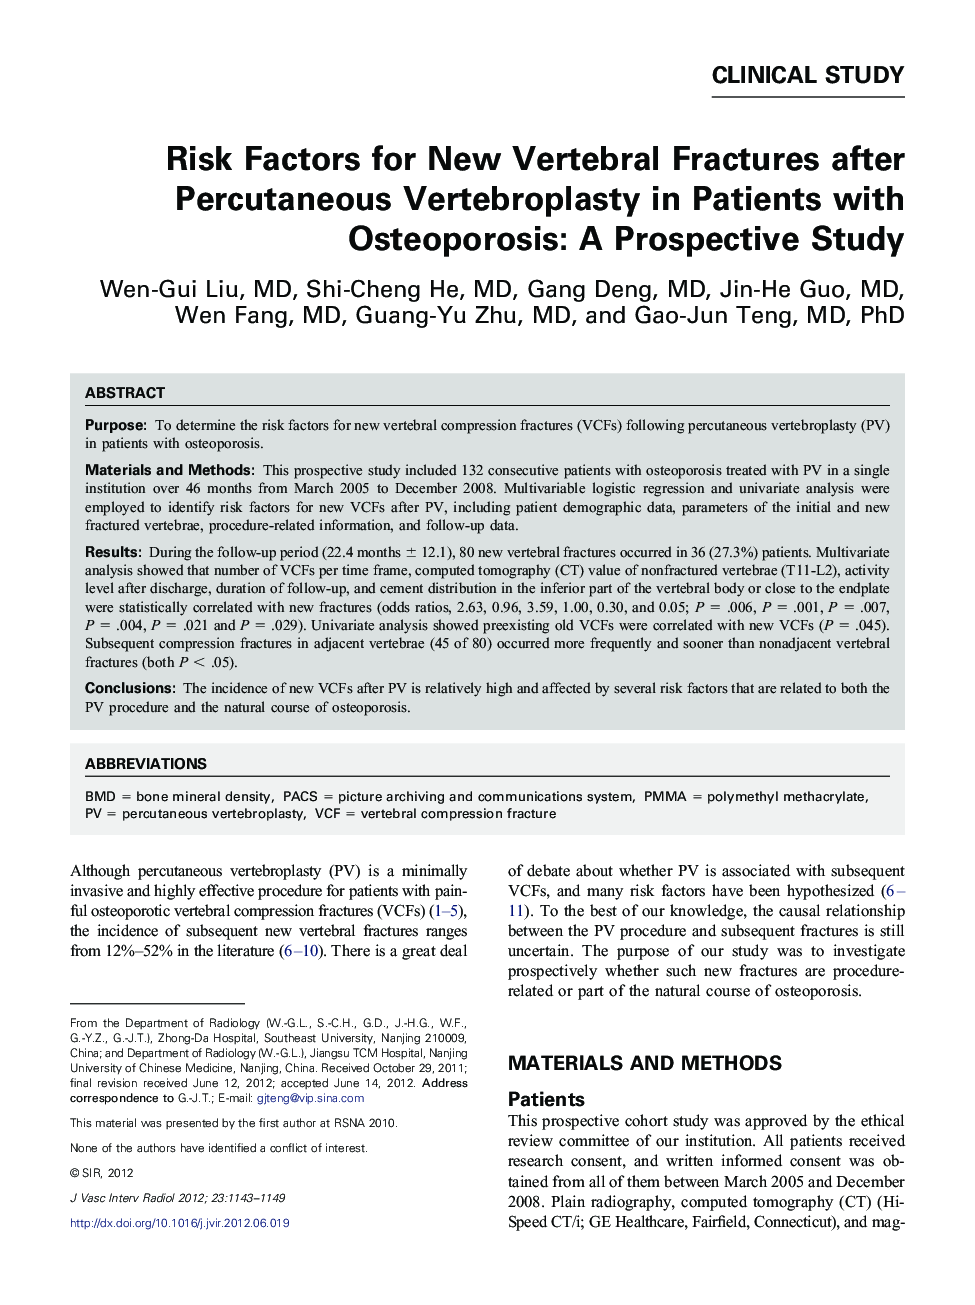 Risk Factors for New Vertebral Fractures after Percutaneous Vertebroplasty in Patients with Osteoporosis: A Prospective Study